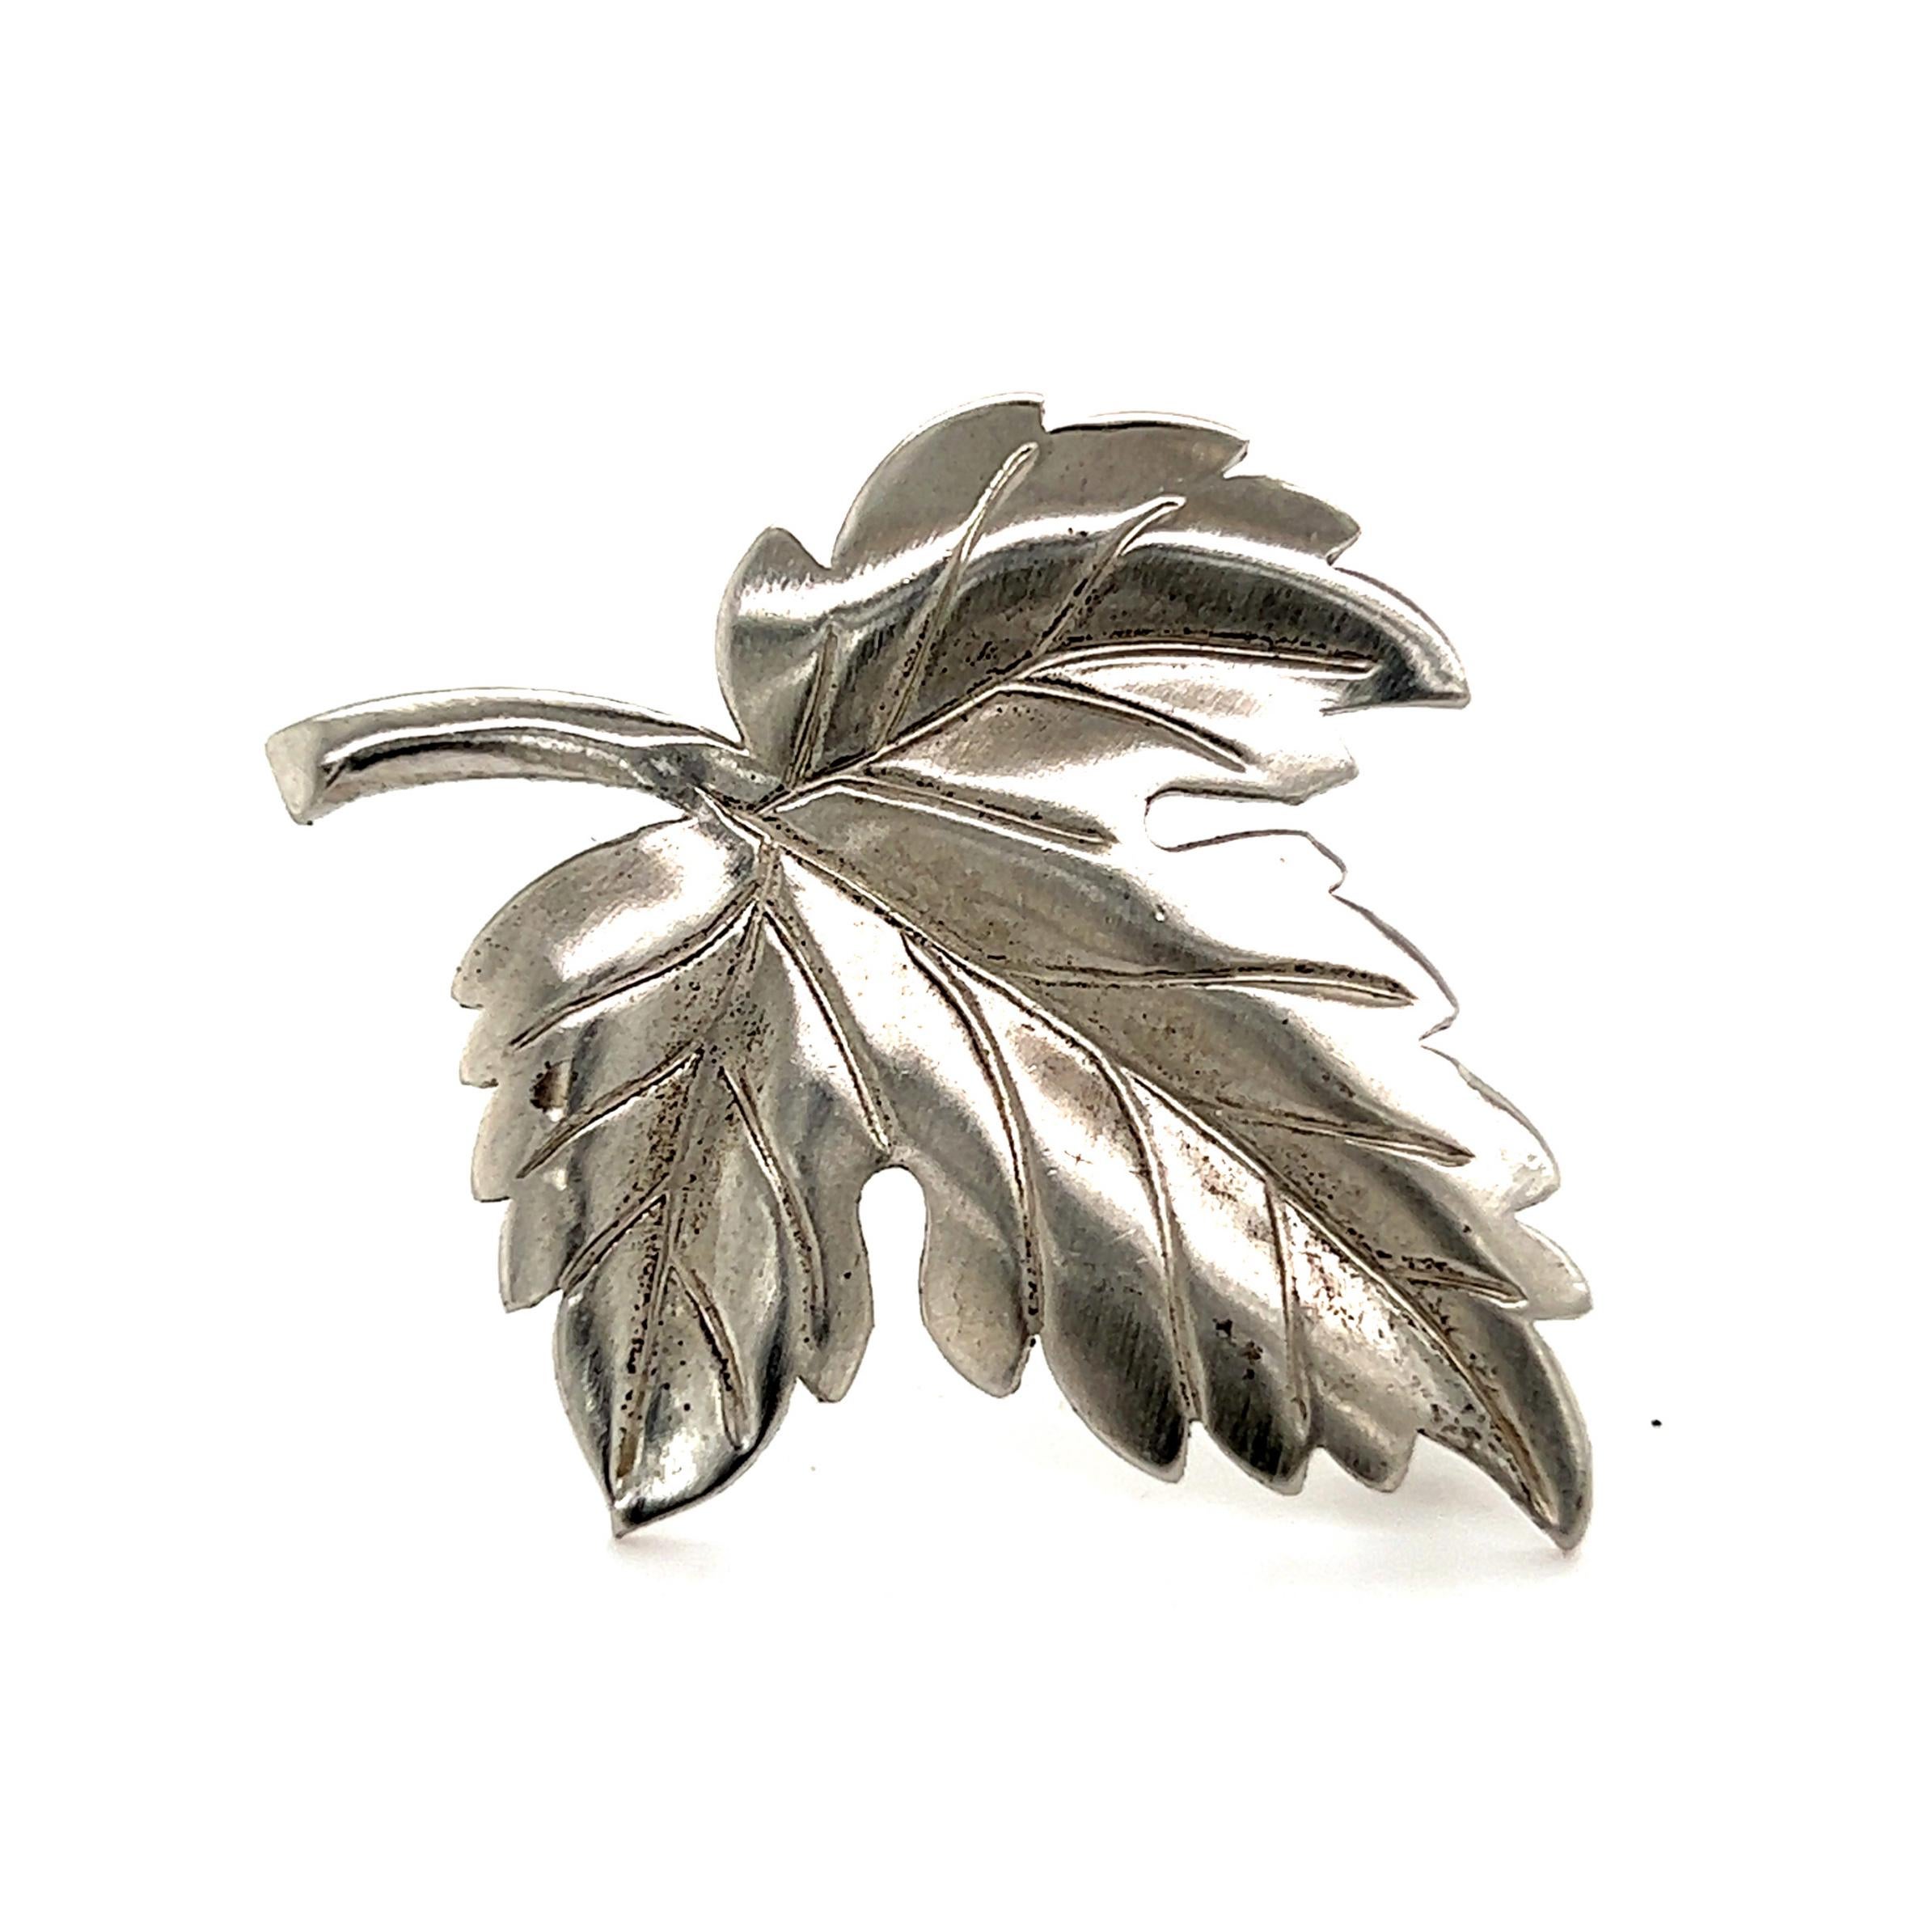 Tiffany & Co Estate Leaf Brooch Pin Sterling Silver 7 Grams TIF346

TRUSTED SELLER SINCE 2002

PLEASE SEE OUR HUNDREDS OF POSITIVE FEEDBACKS FROM OUR CLIENTS!!

FREE SHIPPING!!

DETAILS
Style: Leaf
Weight: 7 Grams
Metal: Sterling Silver

The Tiffany